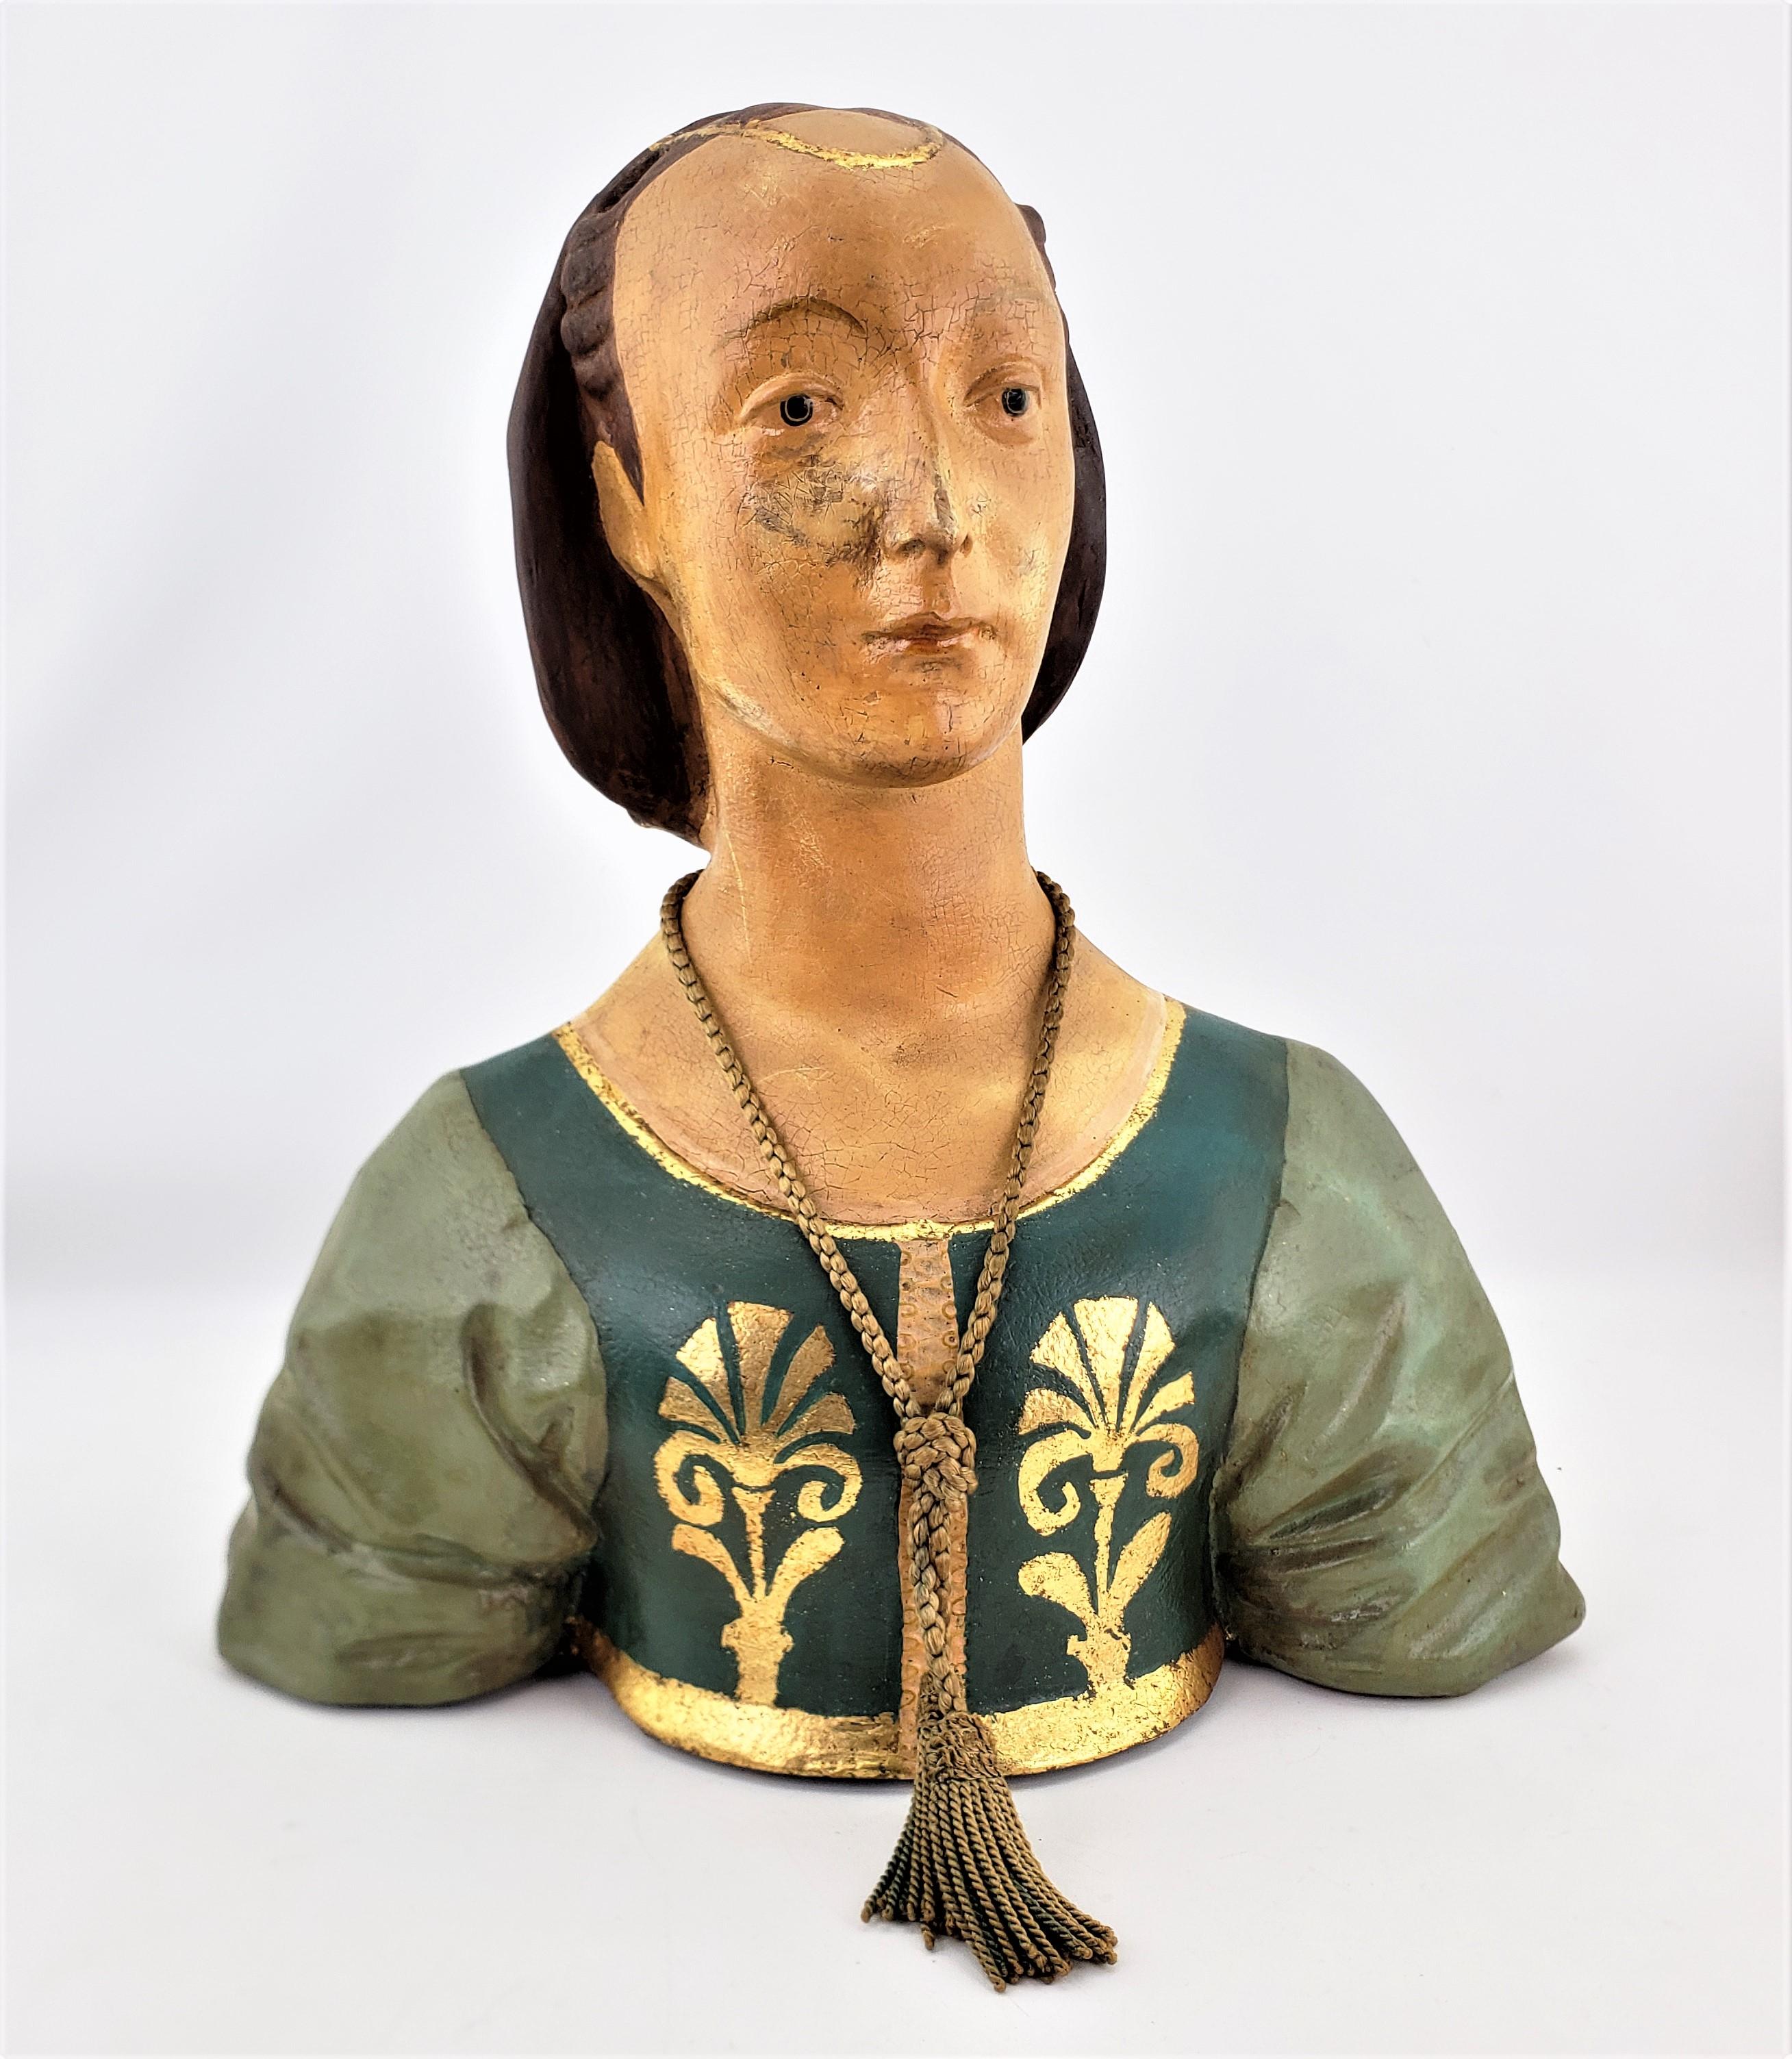 This antique paper mache female bust is unsigned, but presumed to have originated from England and dating to the 1920's and done in a Victorian style. The sculpture is done completely in paper mache which has been hand-painted in a realistic manner,